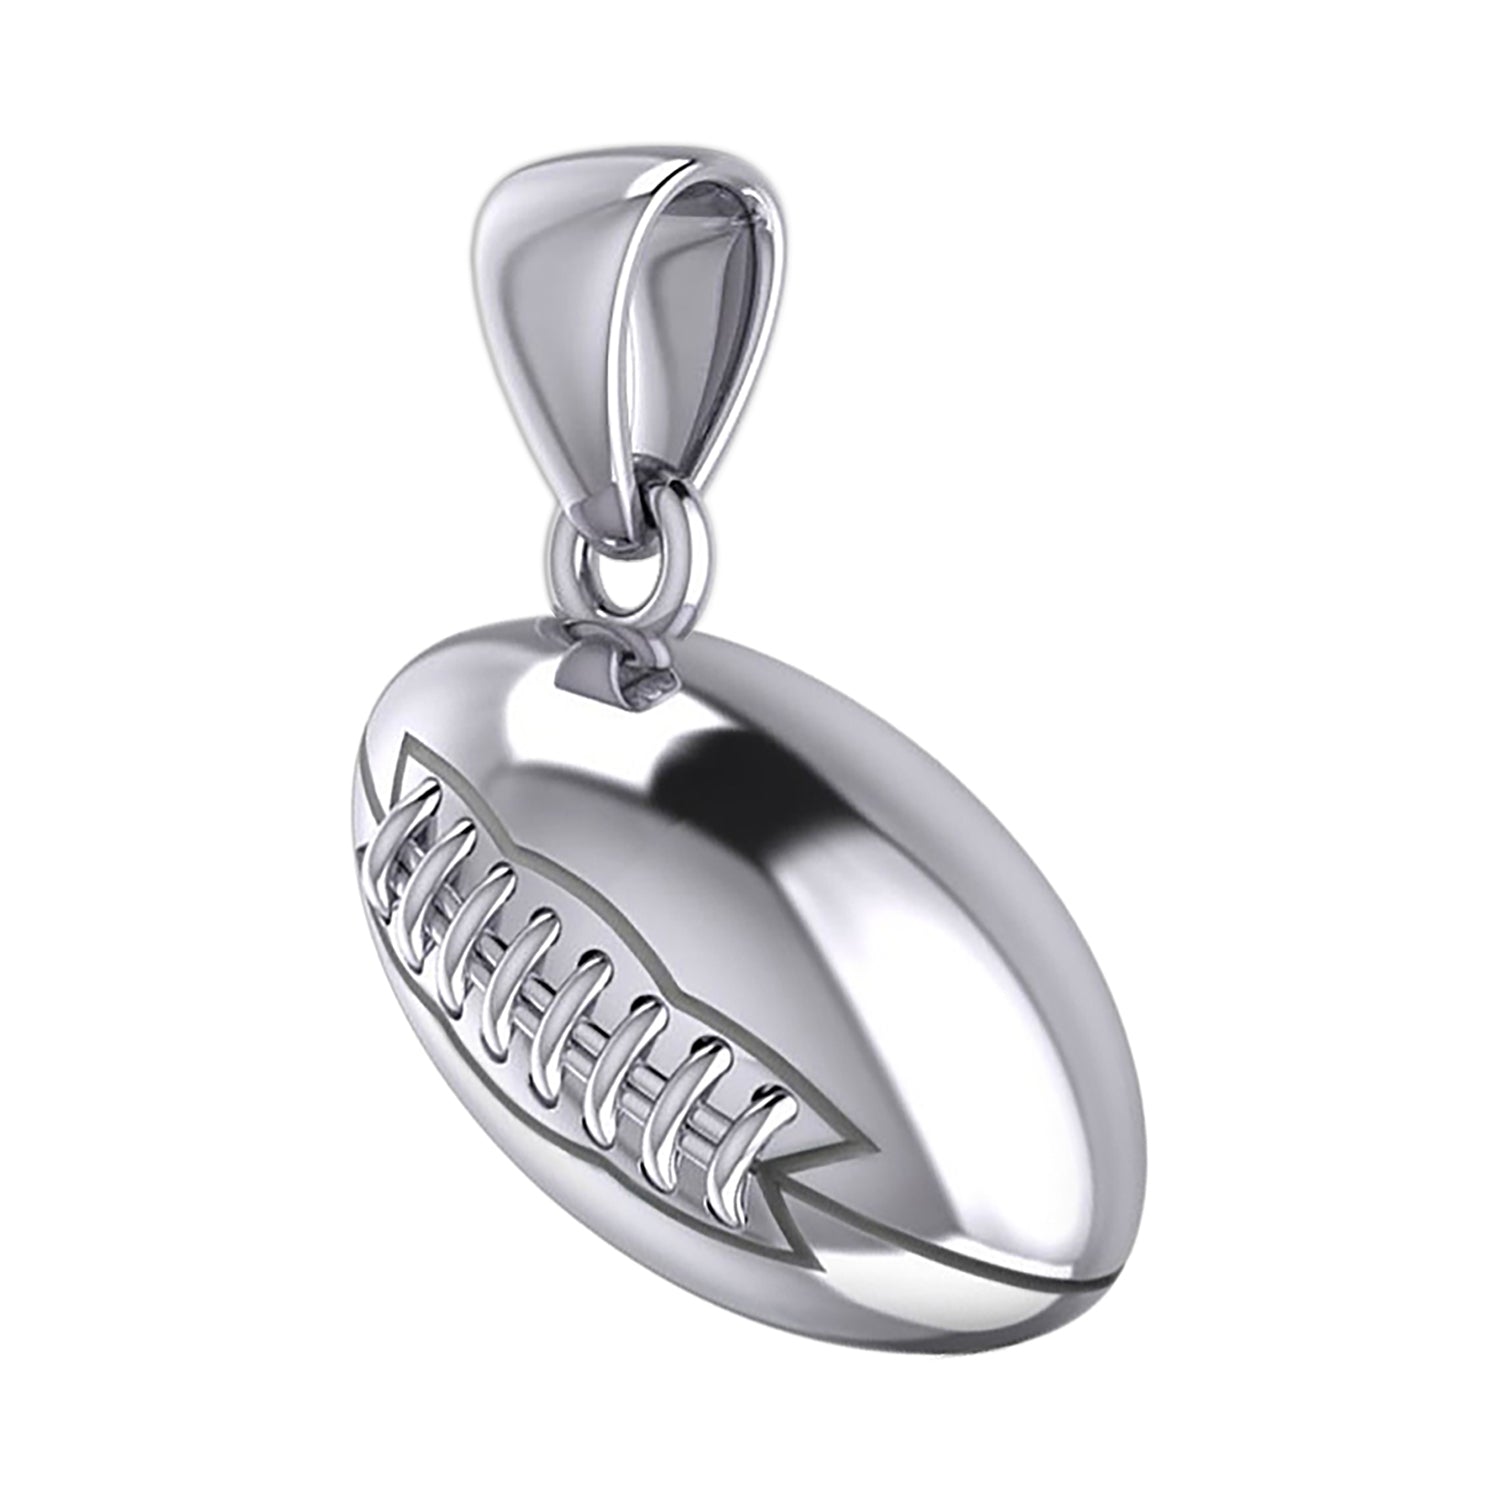 Mens Gold Silver Stainless Steel Football Pendant 23